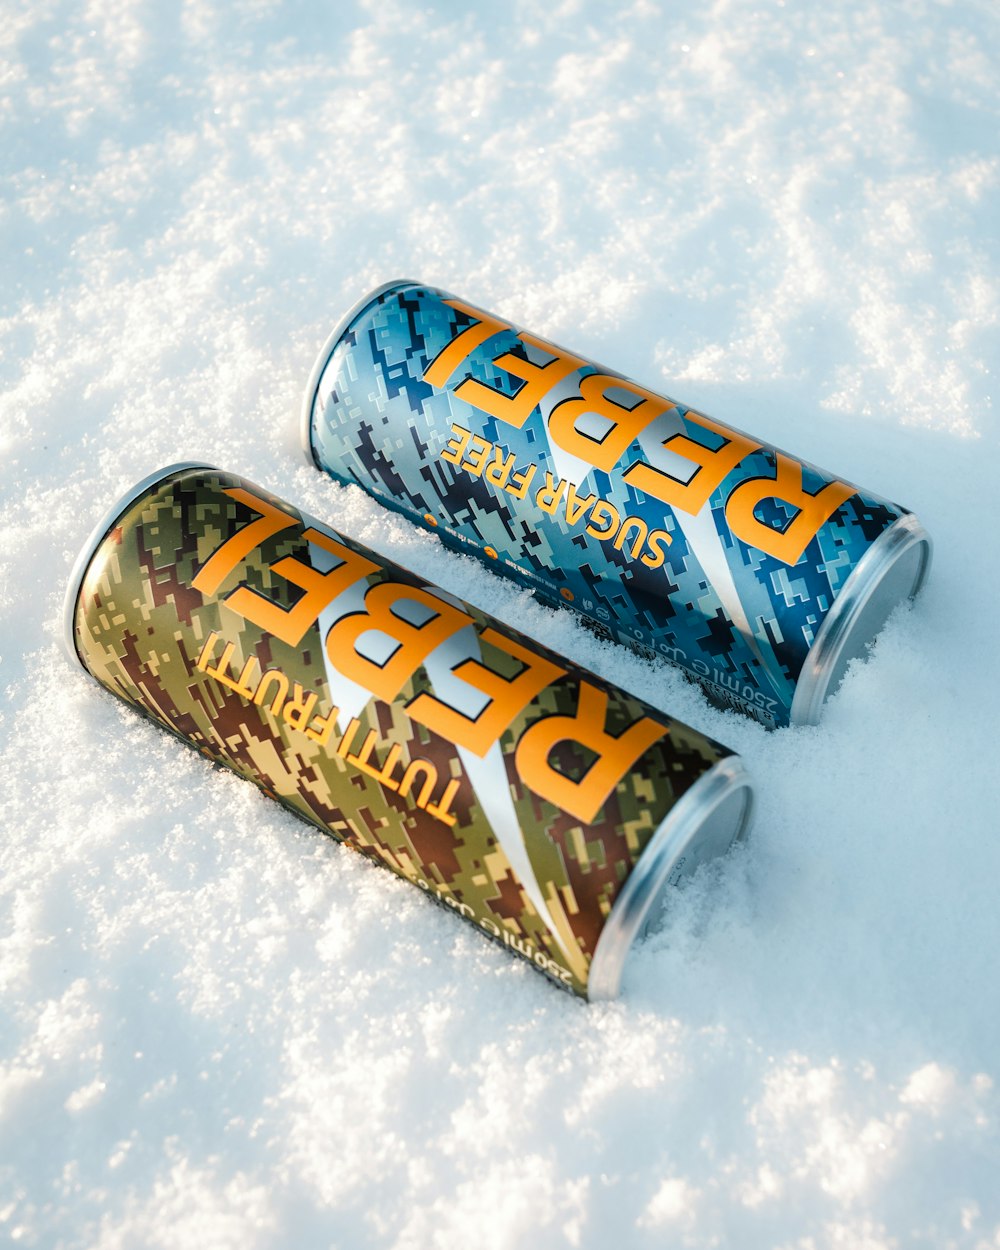 two cans of beer sitting in the snow